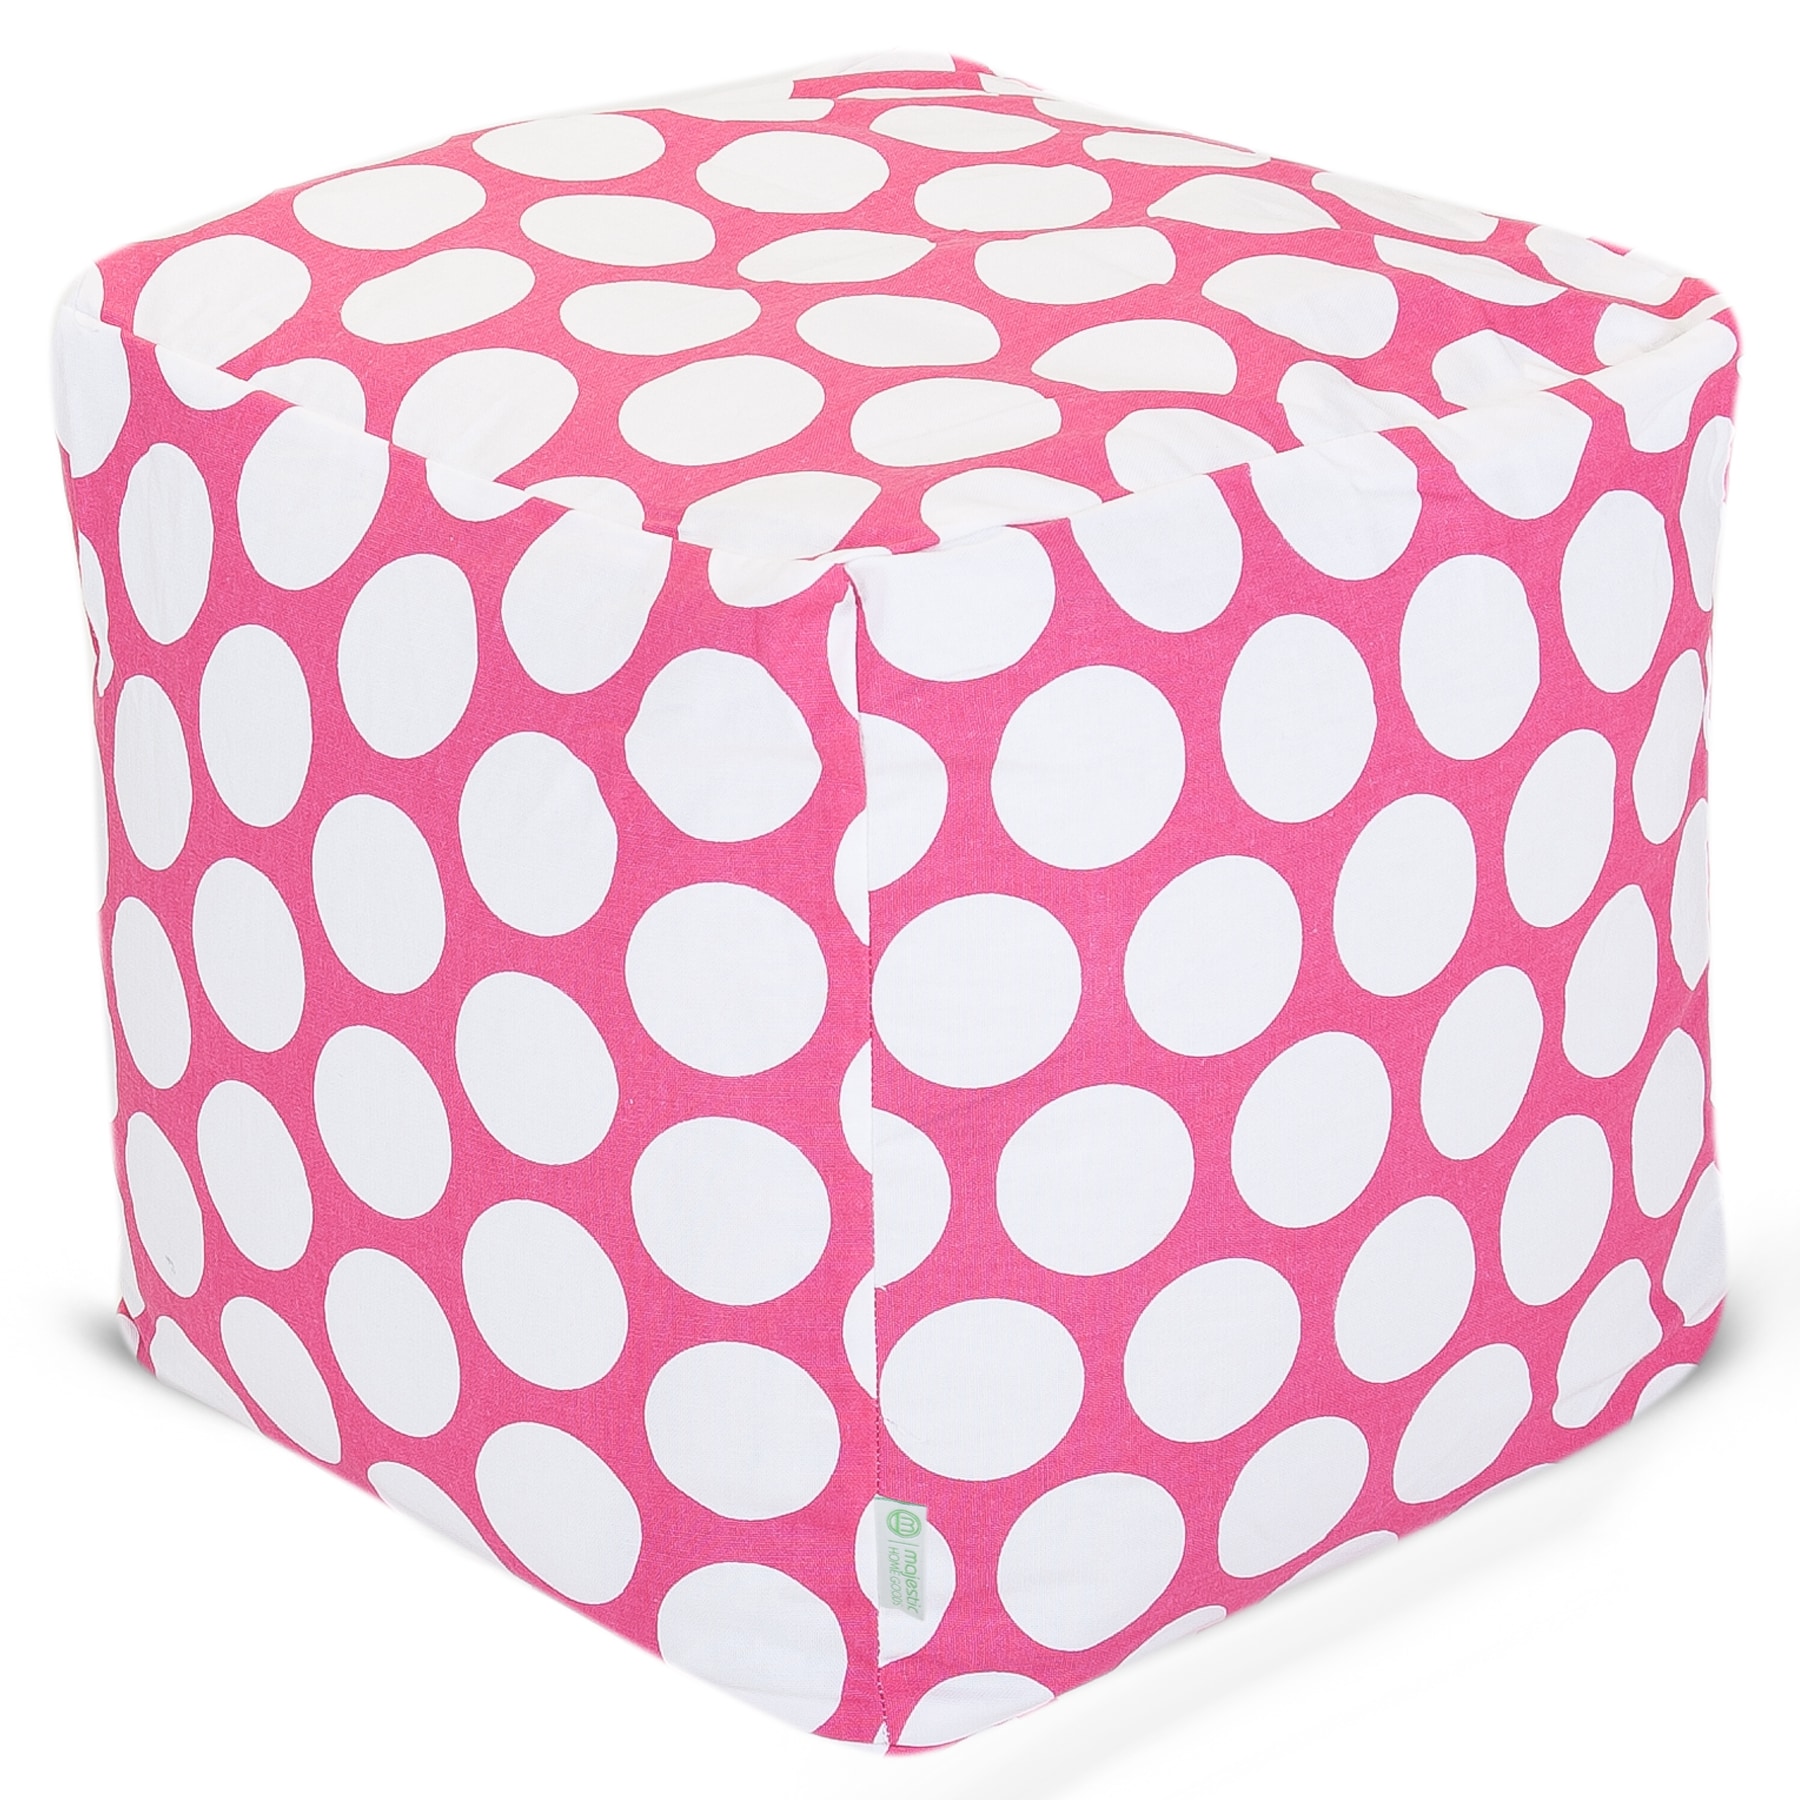 Majestic Home Goods Hot Pink Large Polka Dot Ottoman at Lowes.com